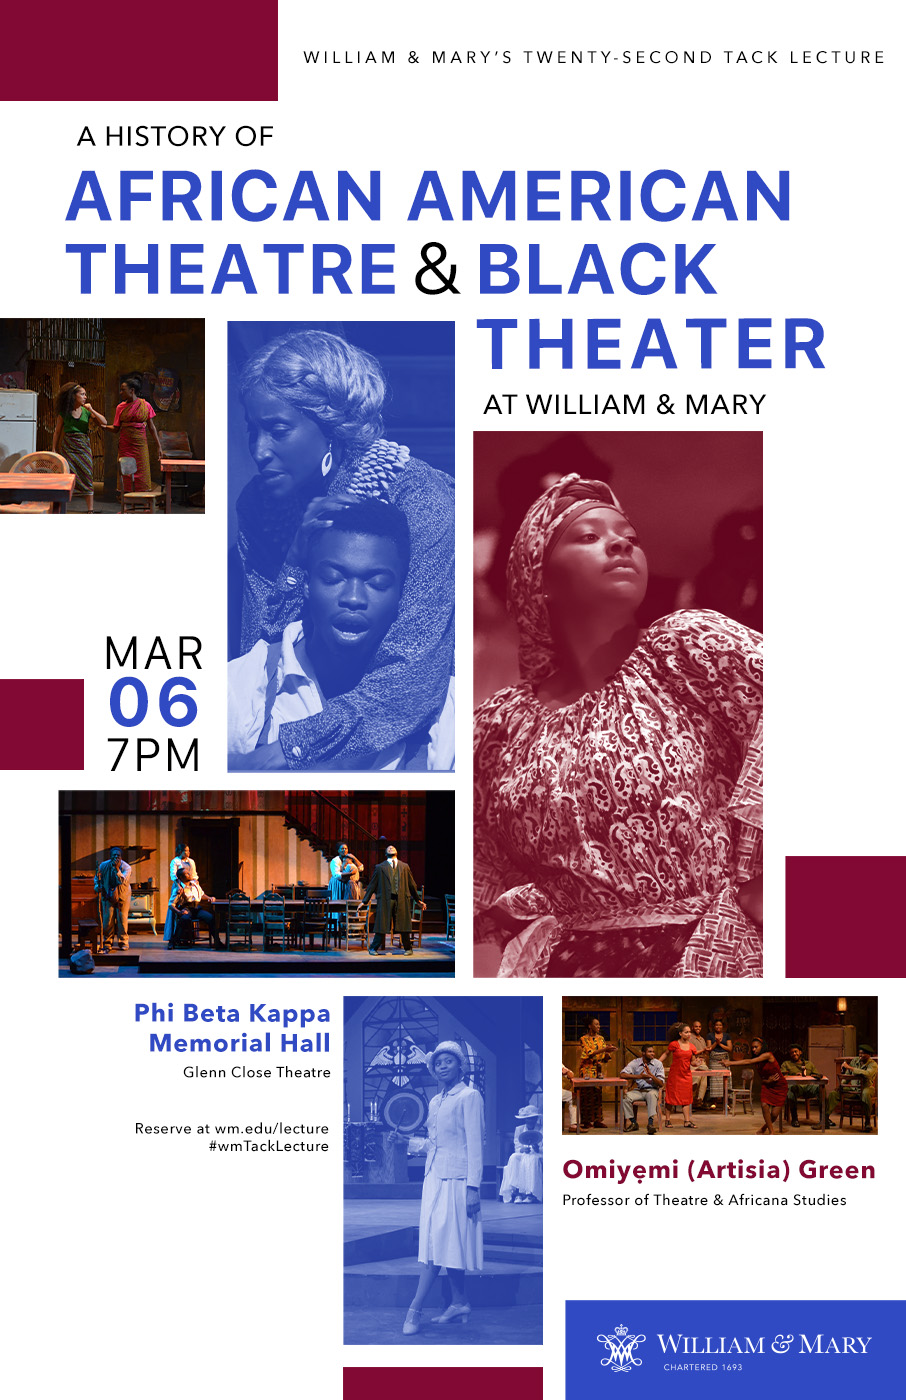 "A History of African American Theatre and Black Theater at William & Mary"